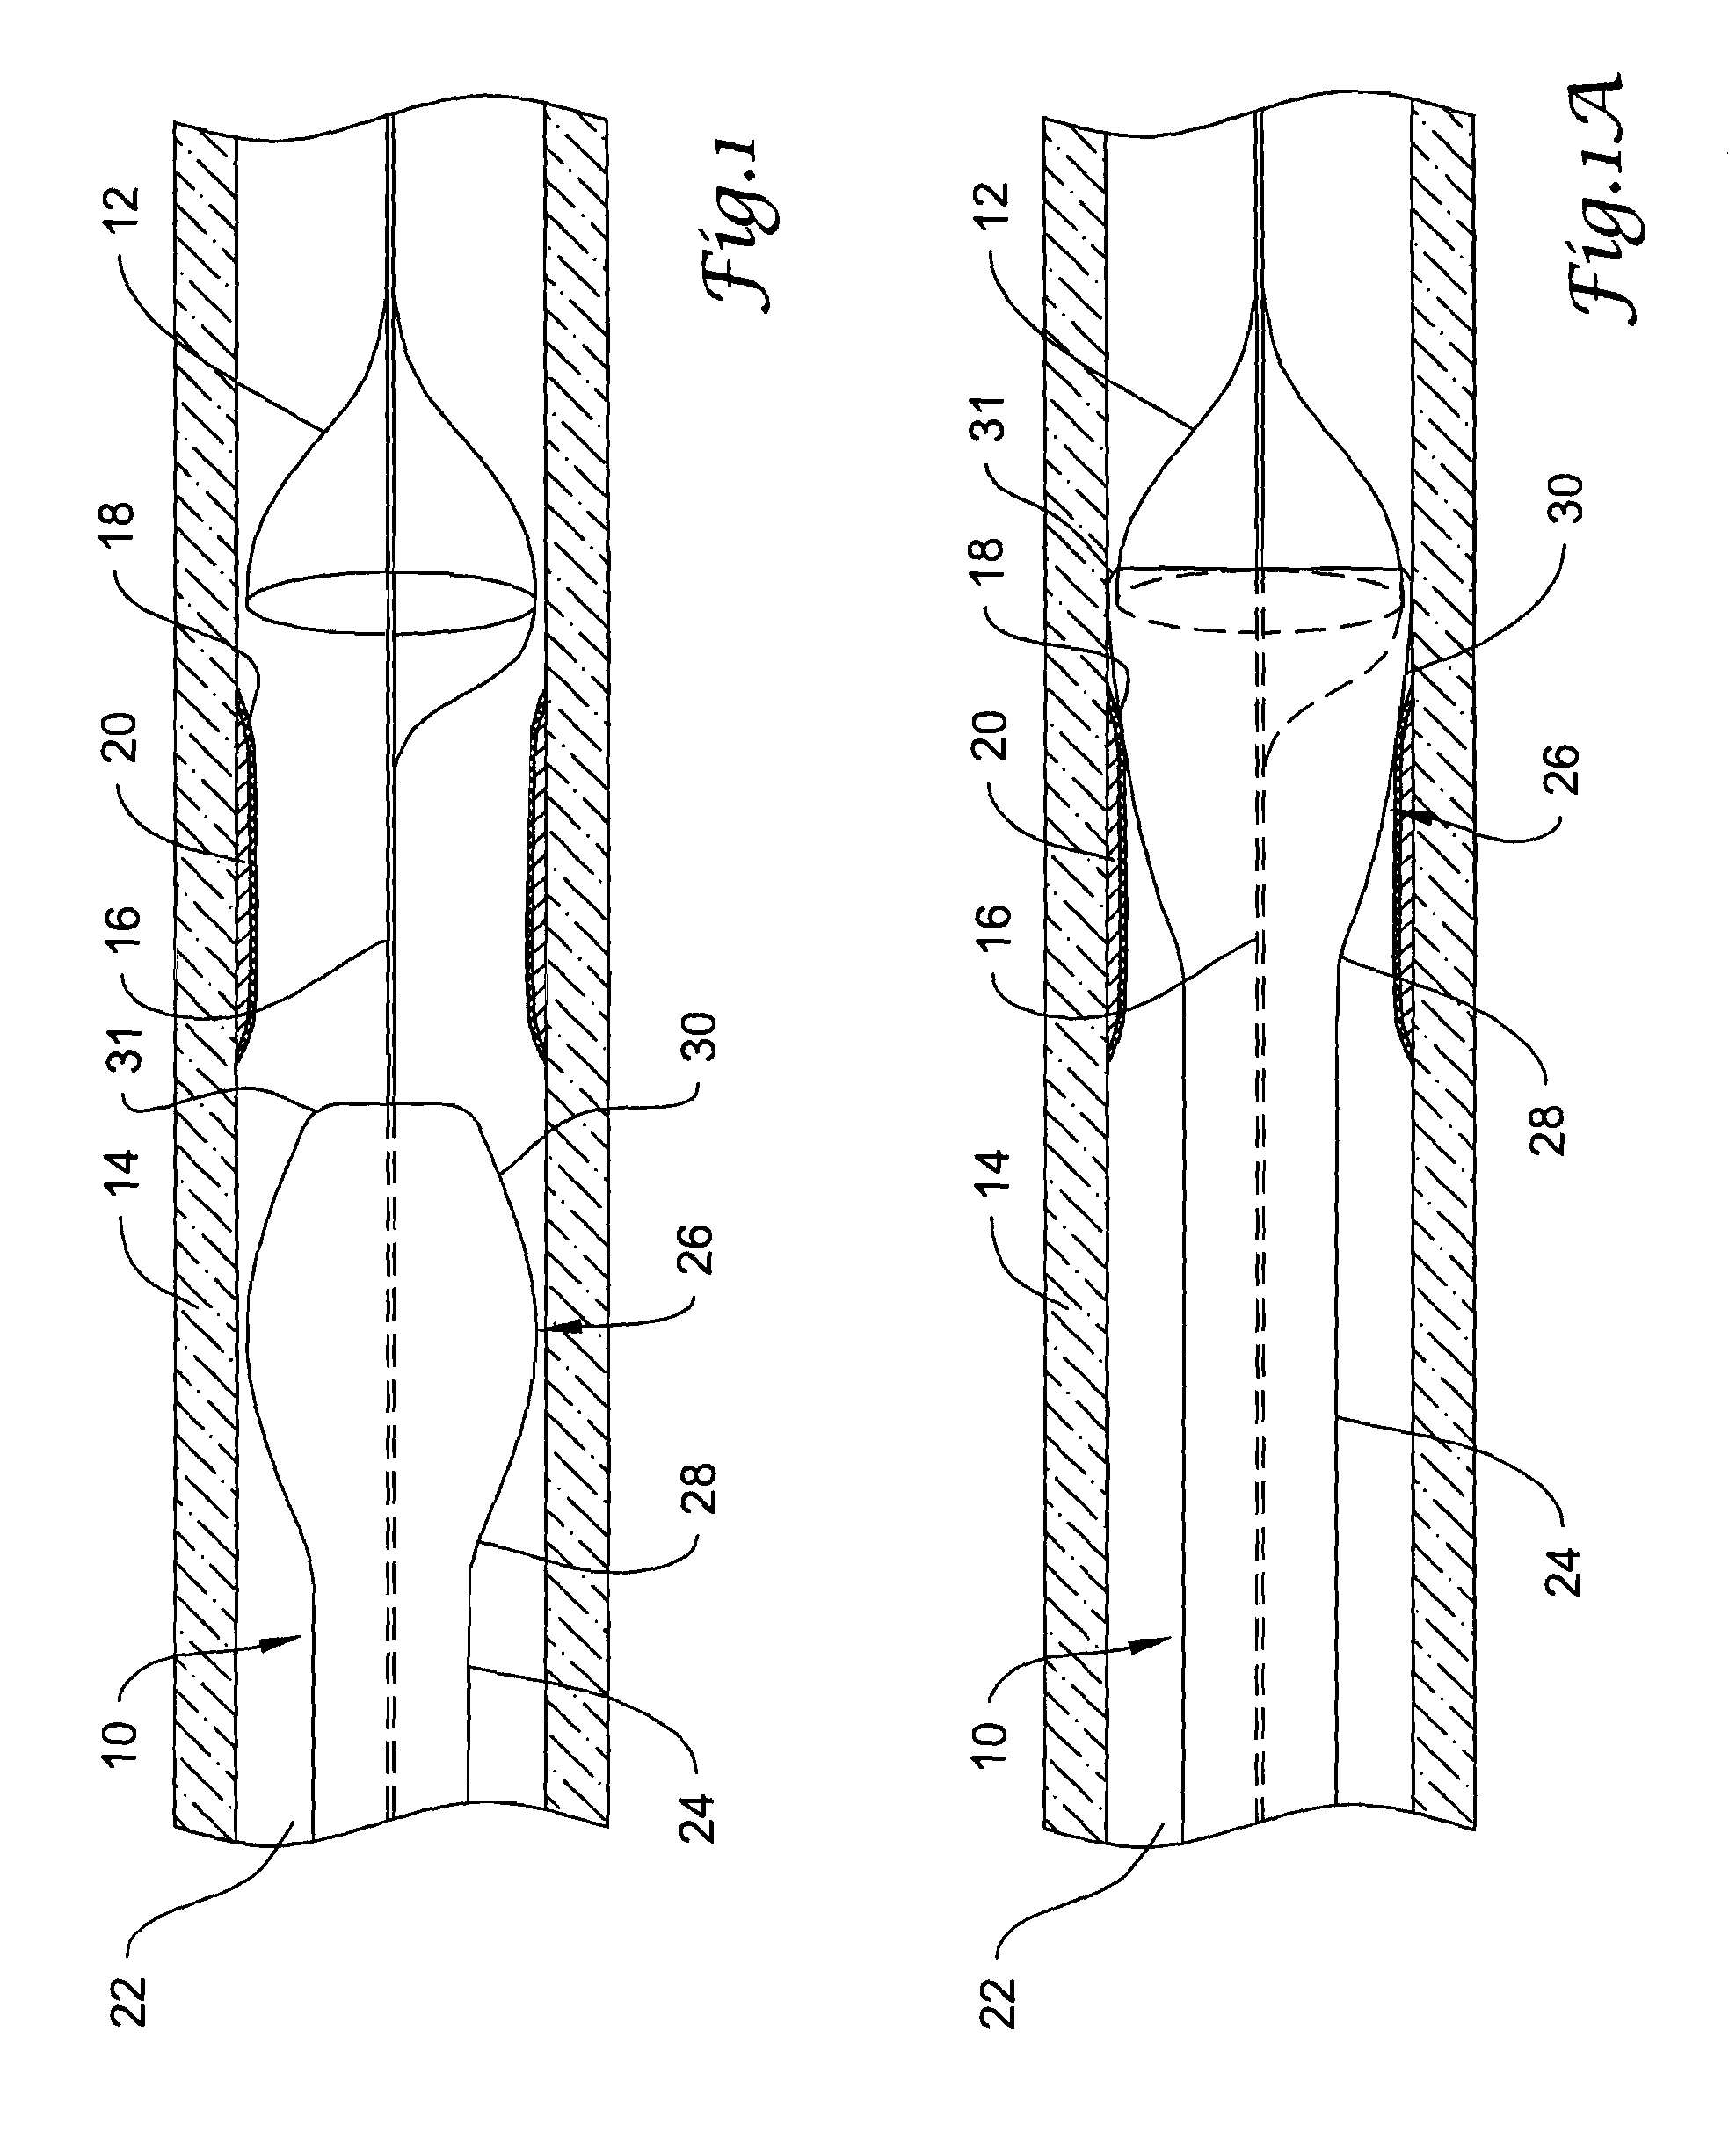 Sheath for use with an embolic protection filtering protection